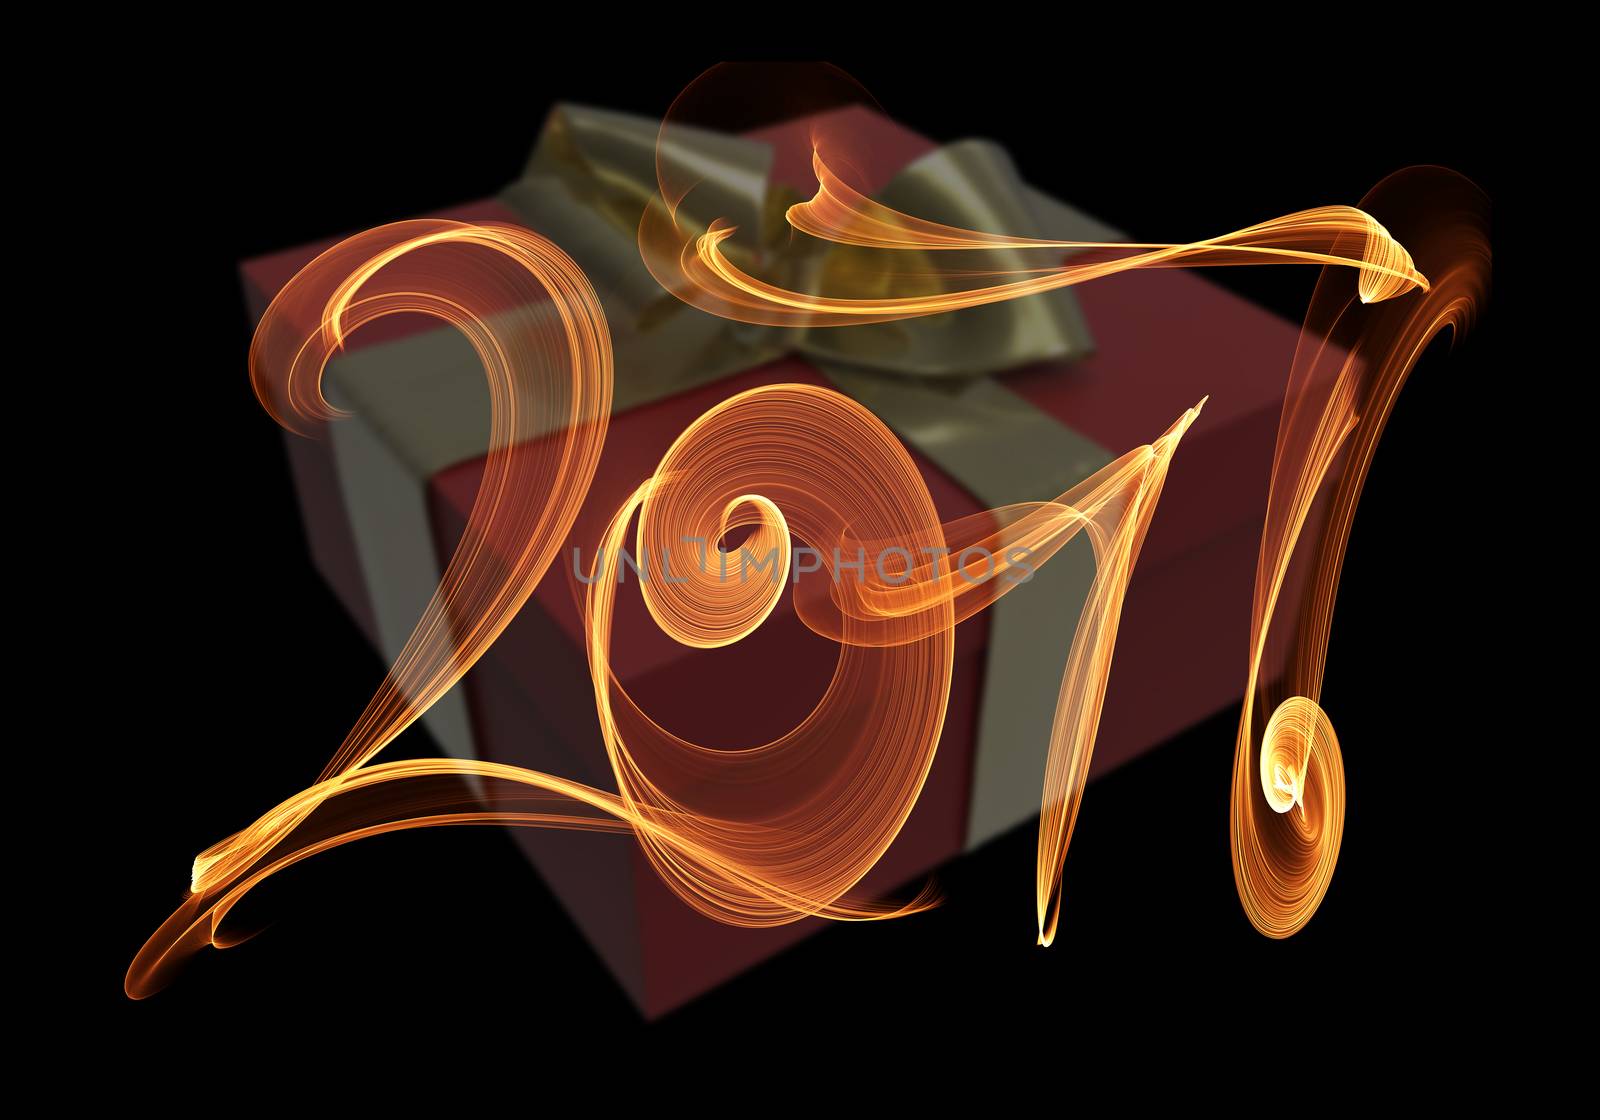 Happy new year 2017 isolated numbers lettering written with fire flame or smoke on black background with gift box. 3d illustration.